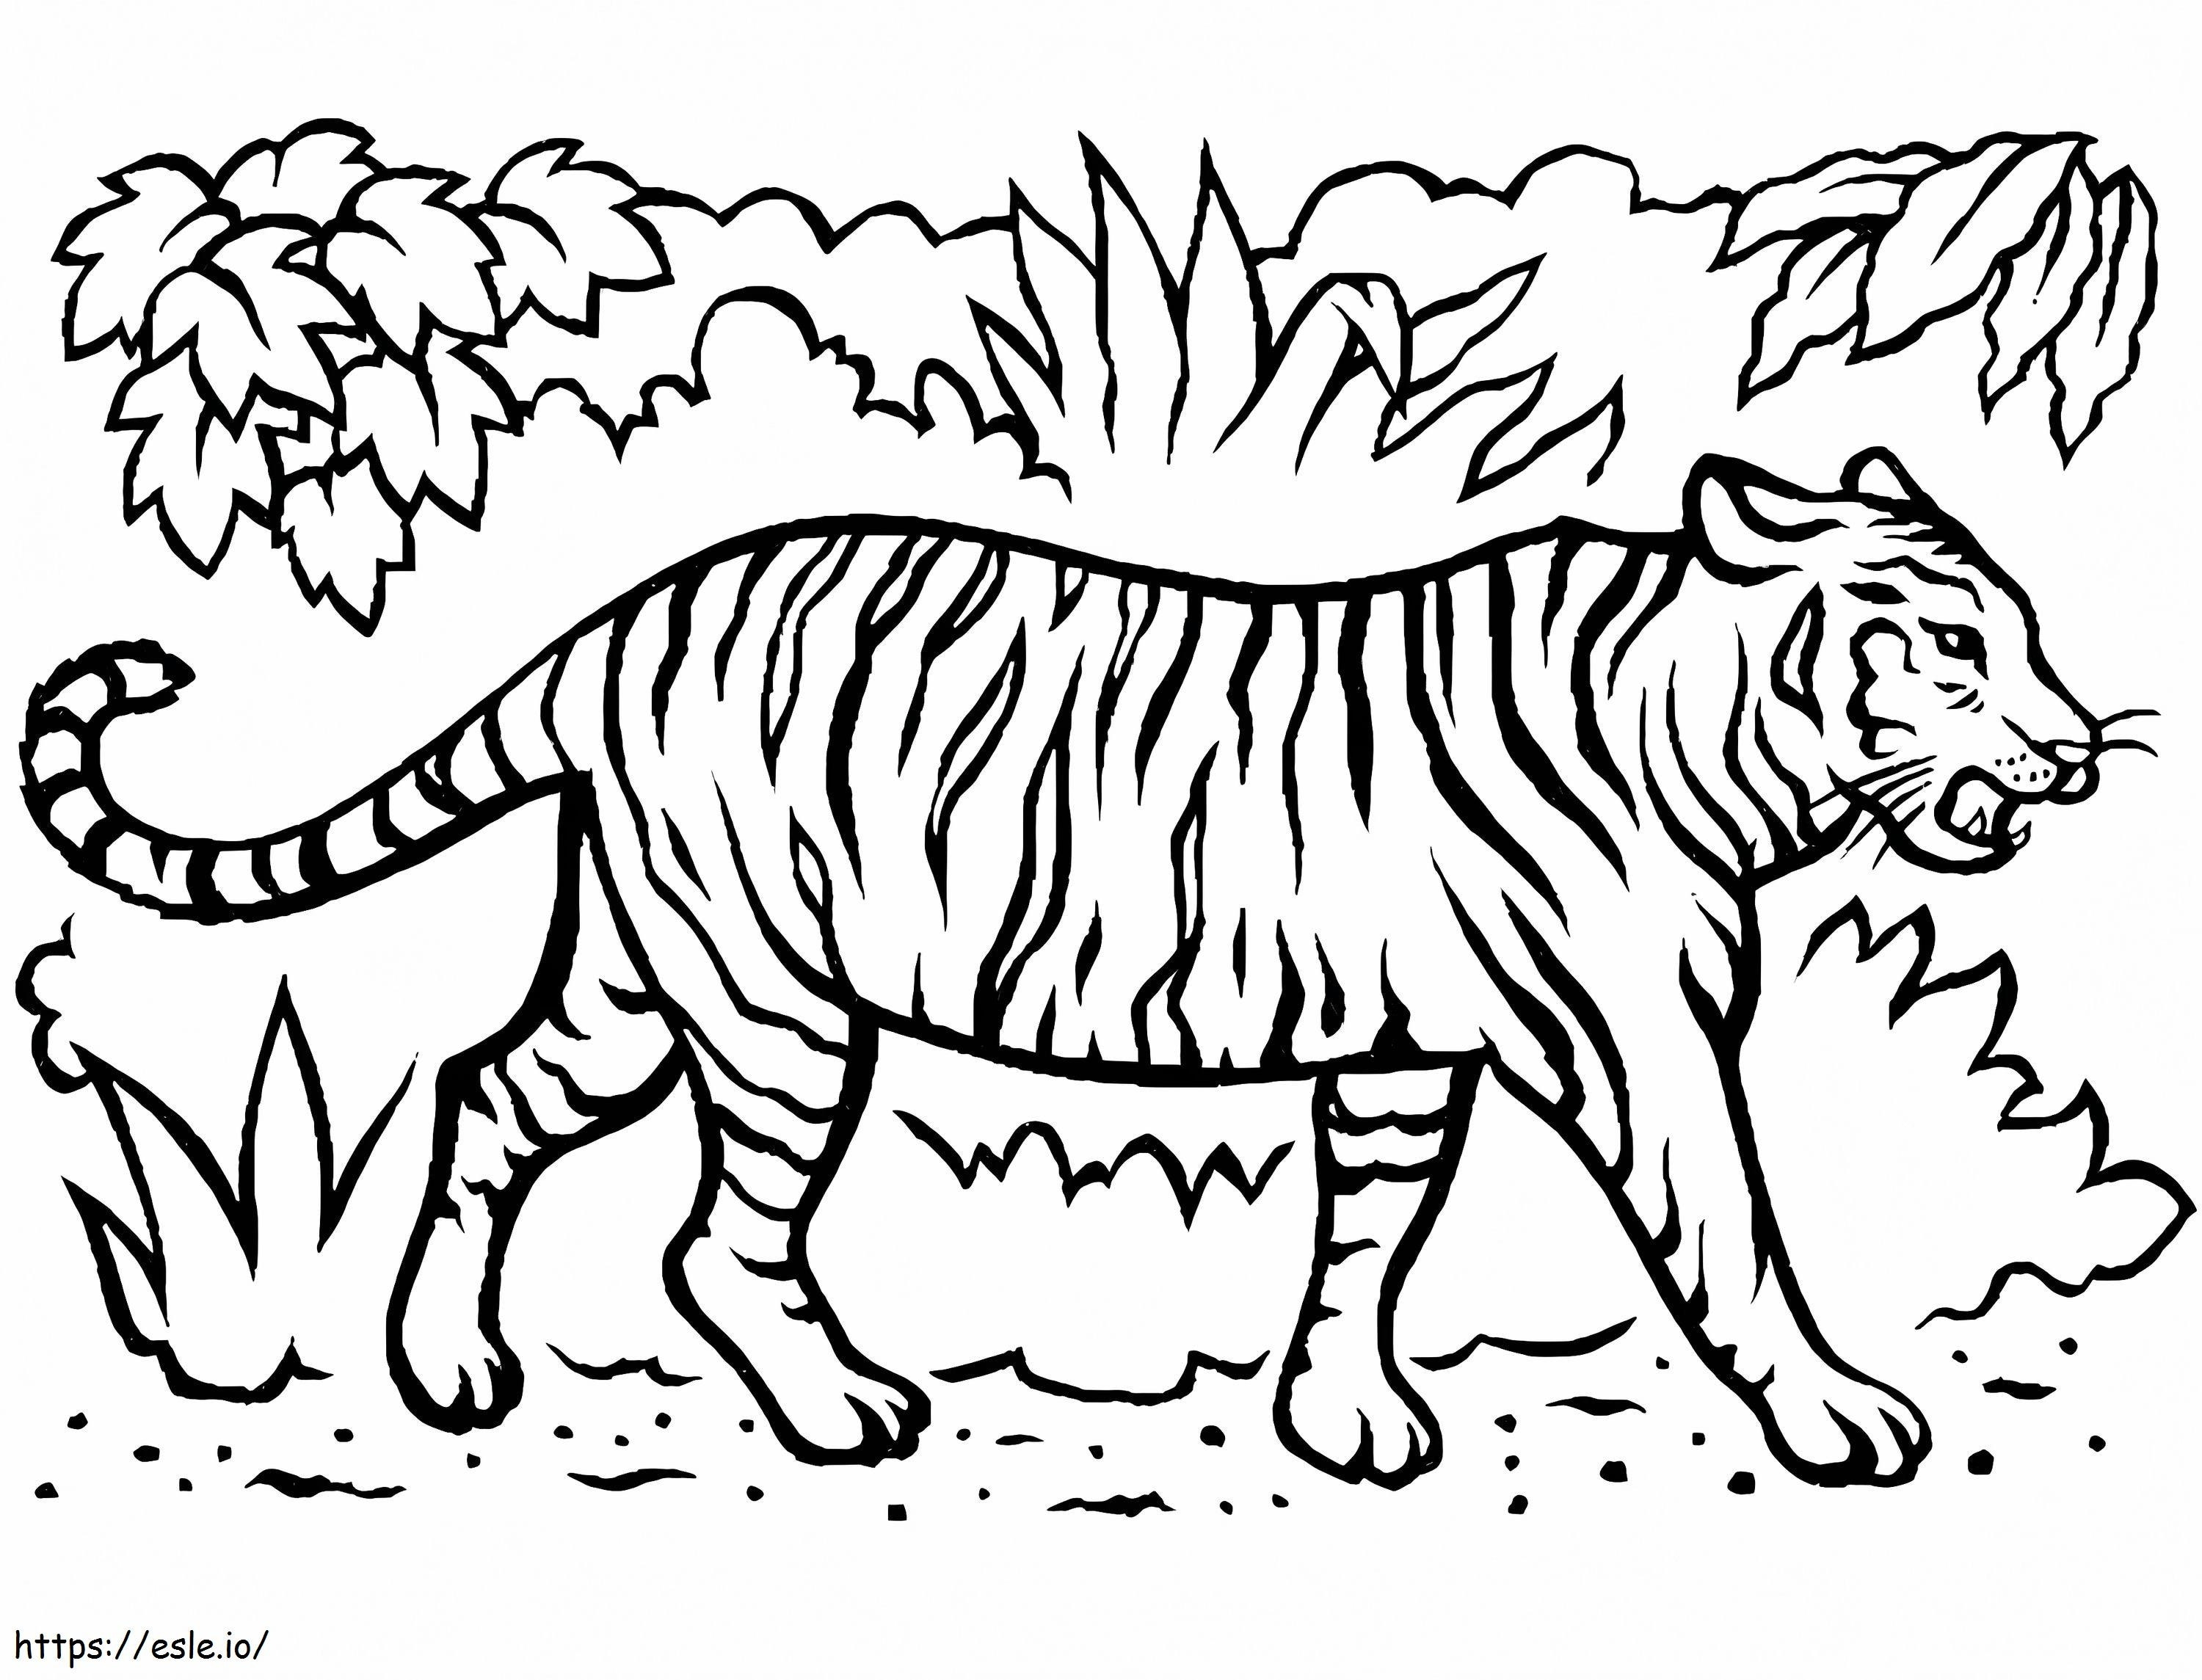 Tiger In The Jungle coloring page